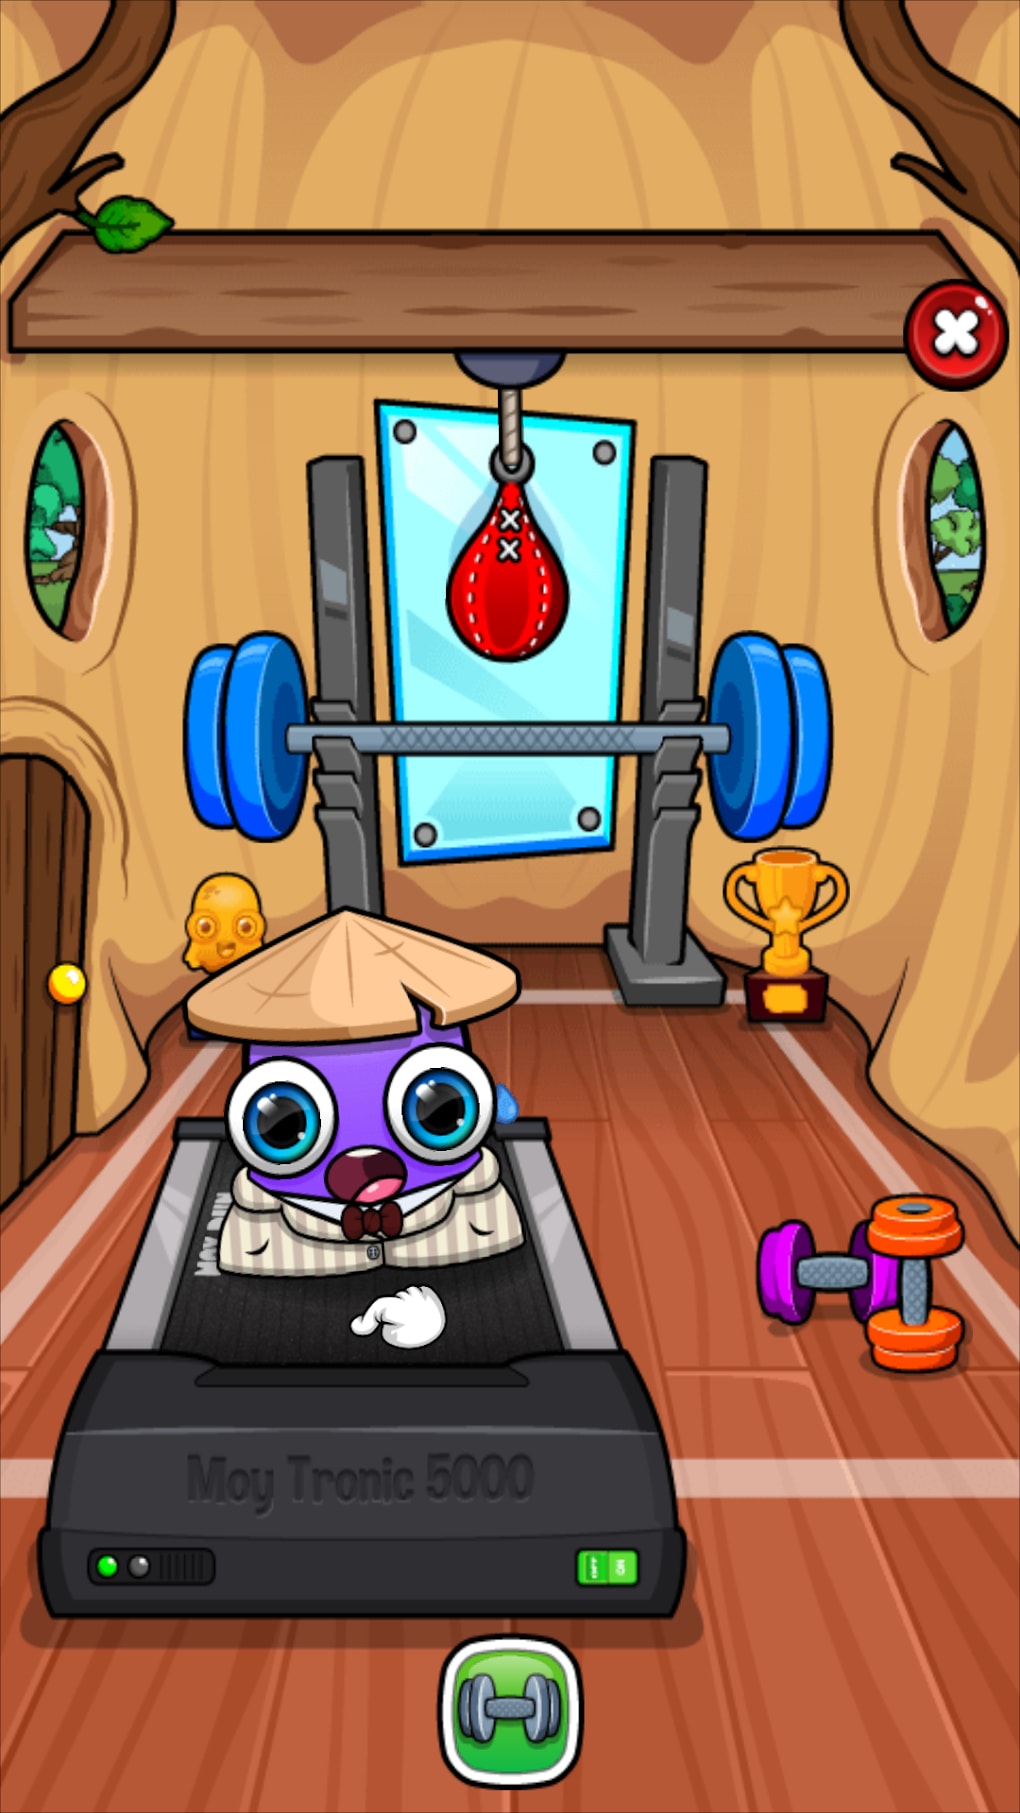 Moy 7 The Virtual Pet Game on the App Store